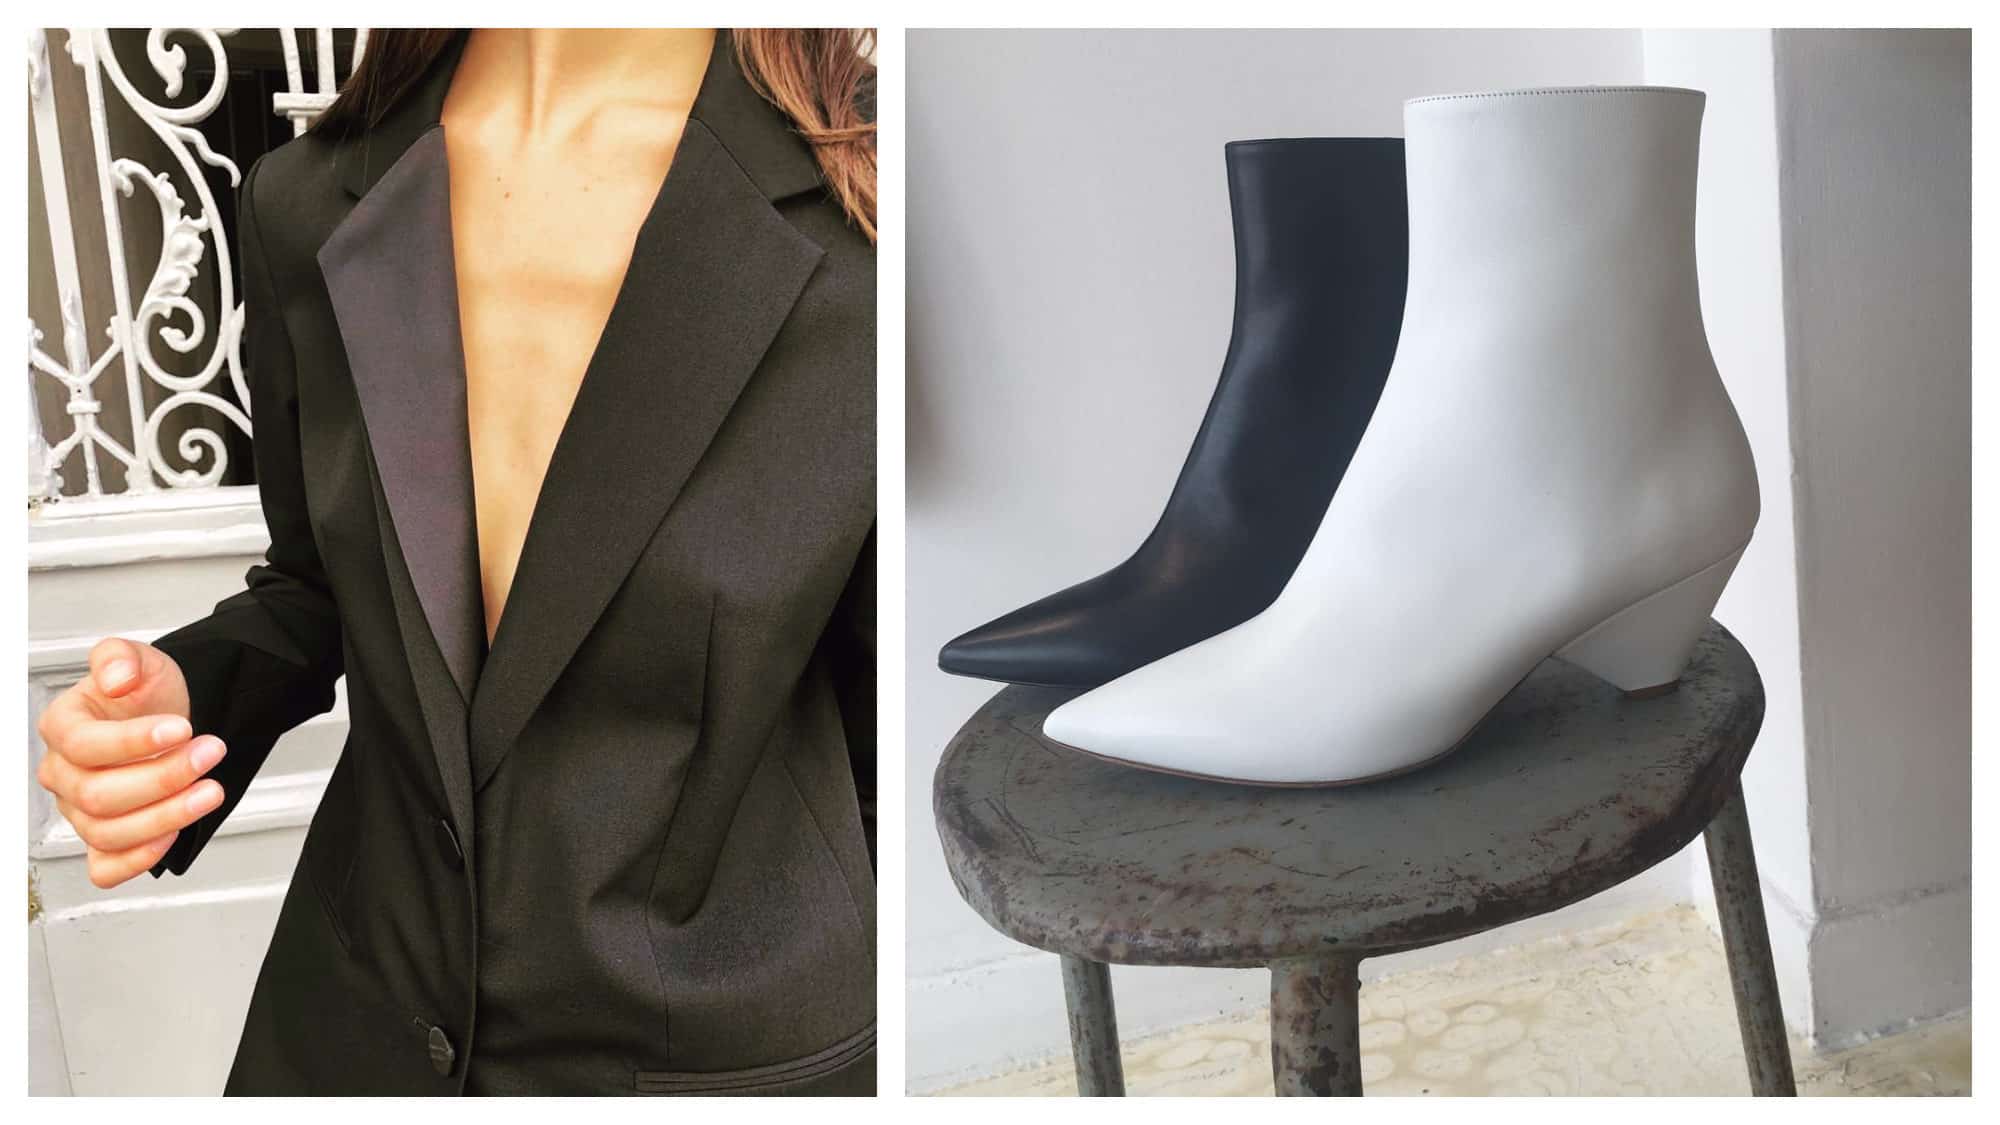 A grey and purple blazer (left) and black and white ankle boots (right) from Spree in Montmartre, which is open on Sundays in Paris.